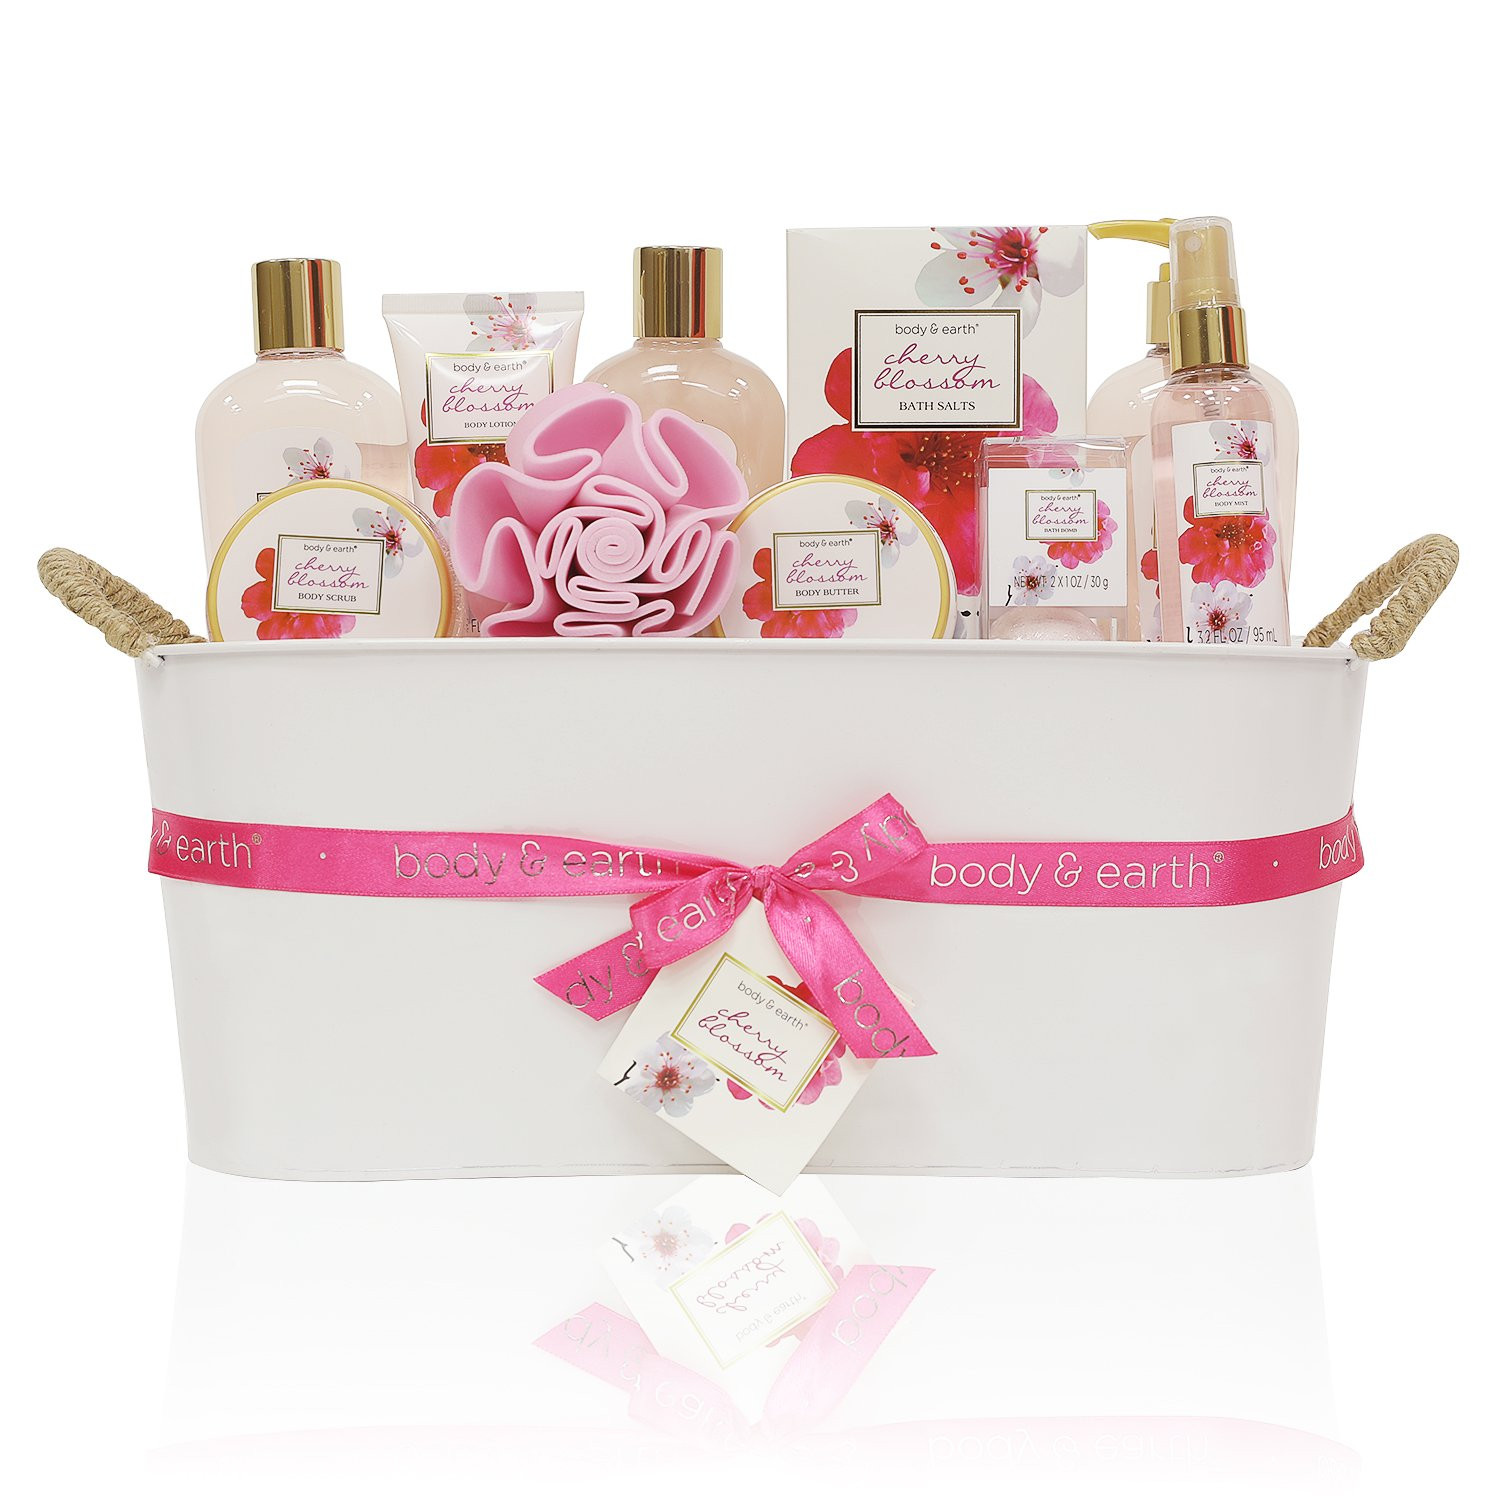 Gift Basket Ideas For Her
 Amazon Gift Baskets for Women Body & Earth Spa